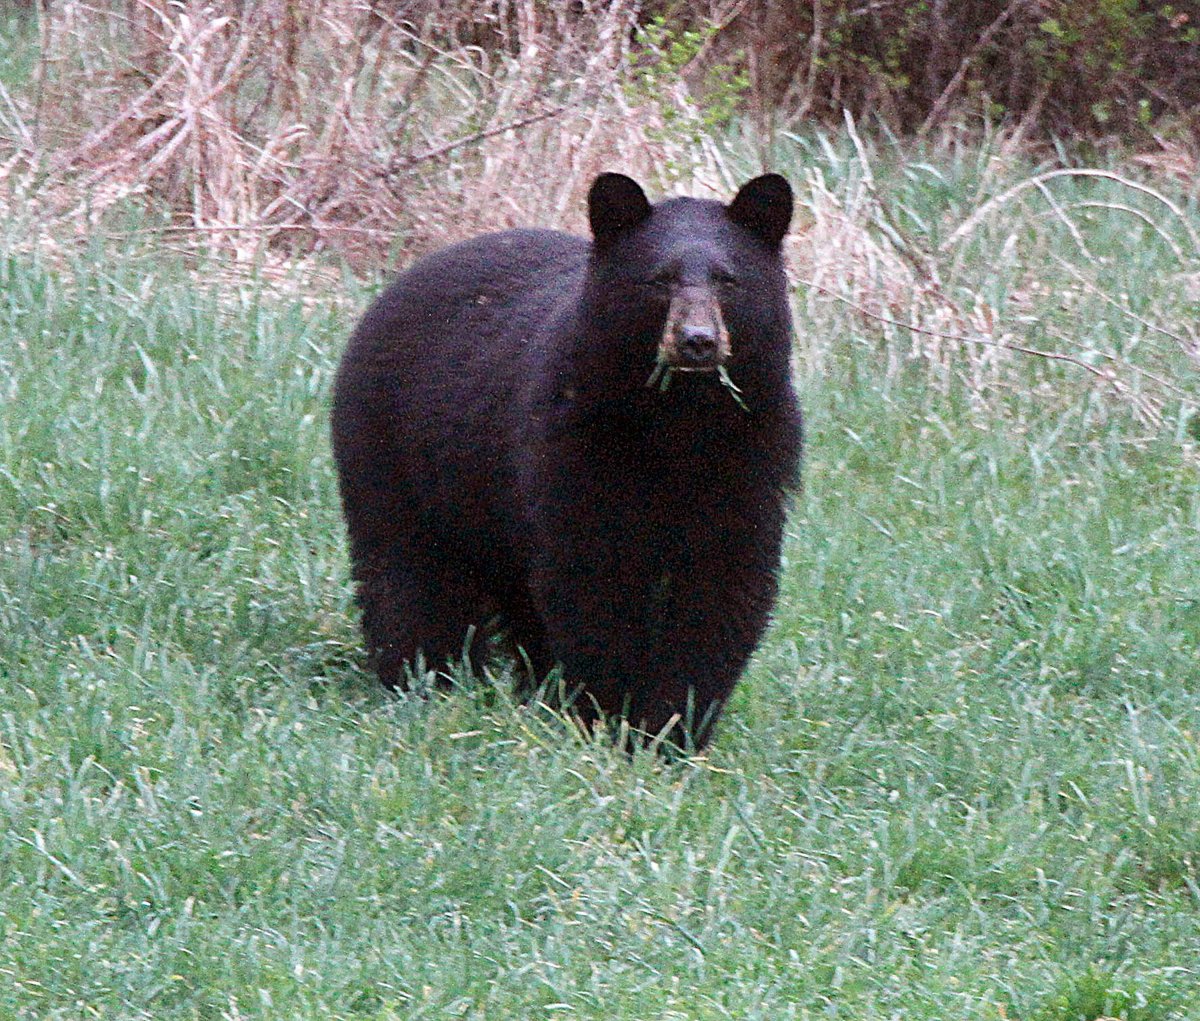 In this April 22, 2012, file photo, a black bear grazes in a field in Calais, Vt. The black bear population in northern New England is growing, and wildlife managers said this yearÄôs hunt for the animals is especially important to control their population. The growing bear population has caused some confrontations between people and bears, especially during dry summers like this one. 